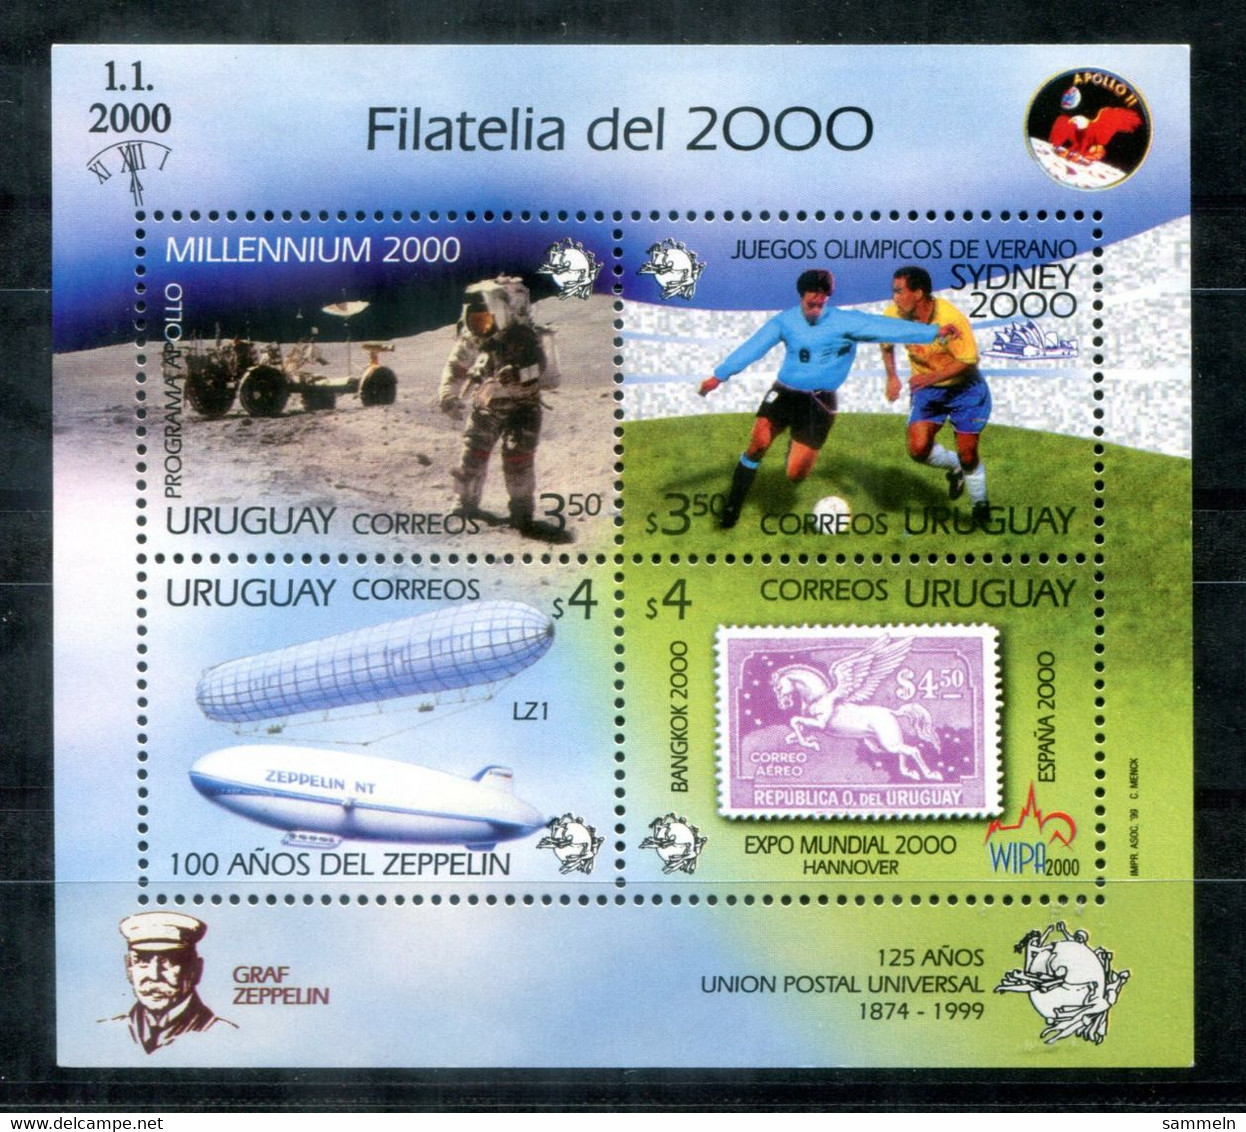 URUGUAY Block 89 Mnh, Expo 2000 Hannover, Weltraum, Space, Fußball, Football, Zeppelin, Marke Auf Marke, Stamp On Stamp - 2000 – Hannover (Alemania)